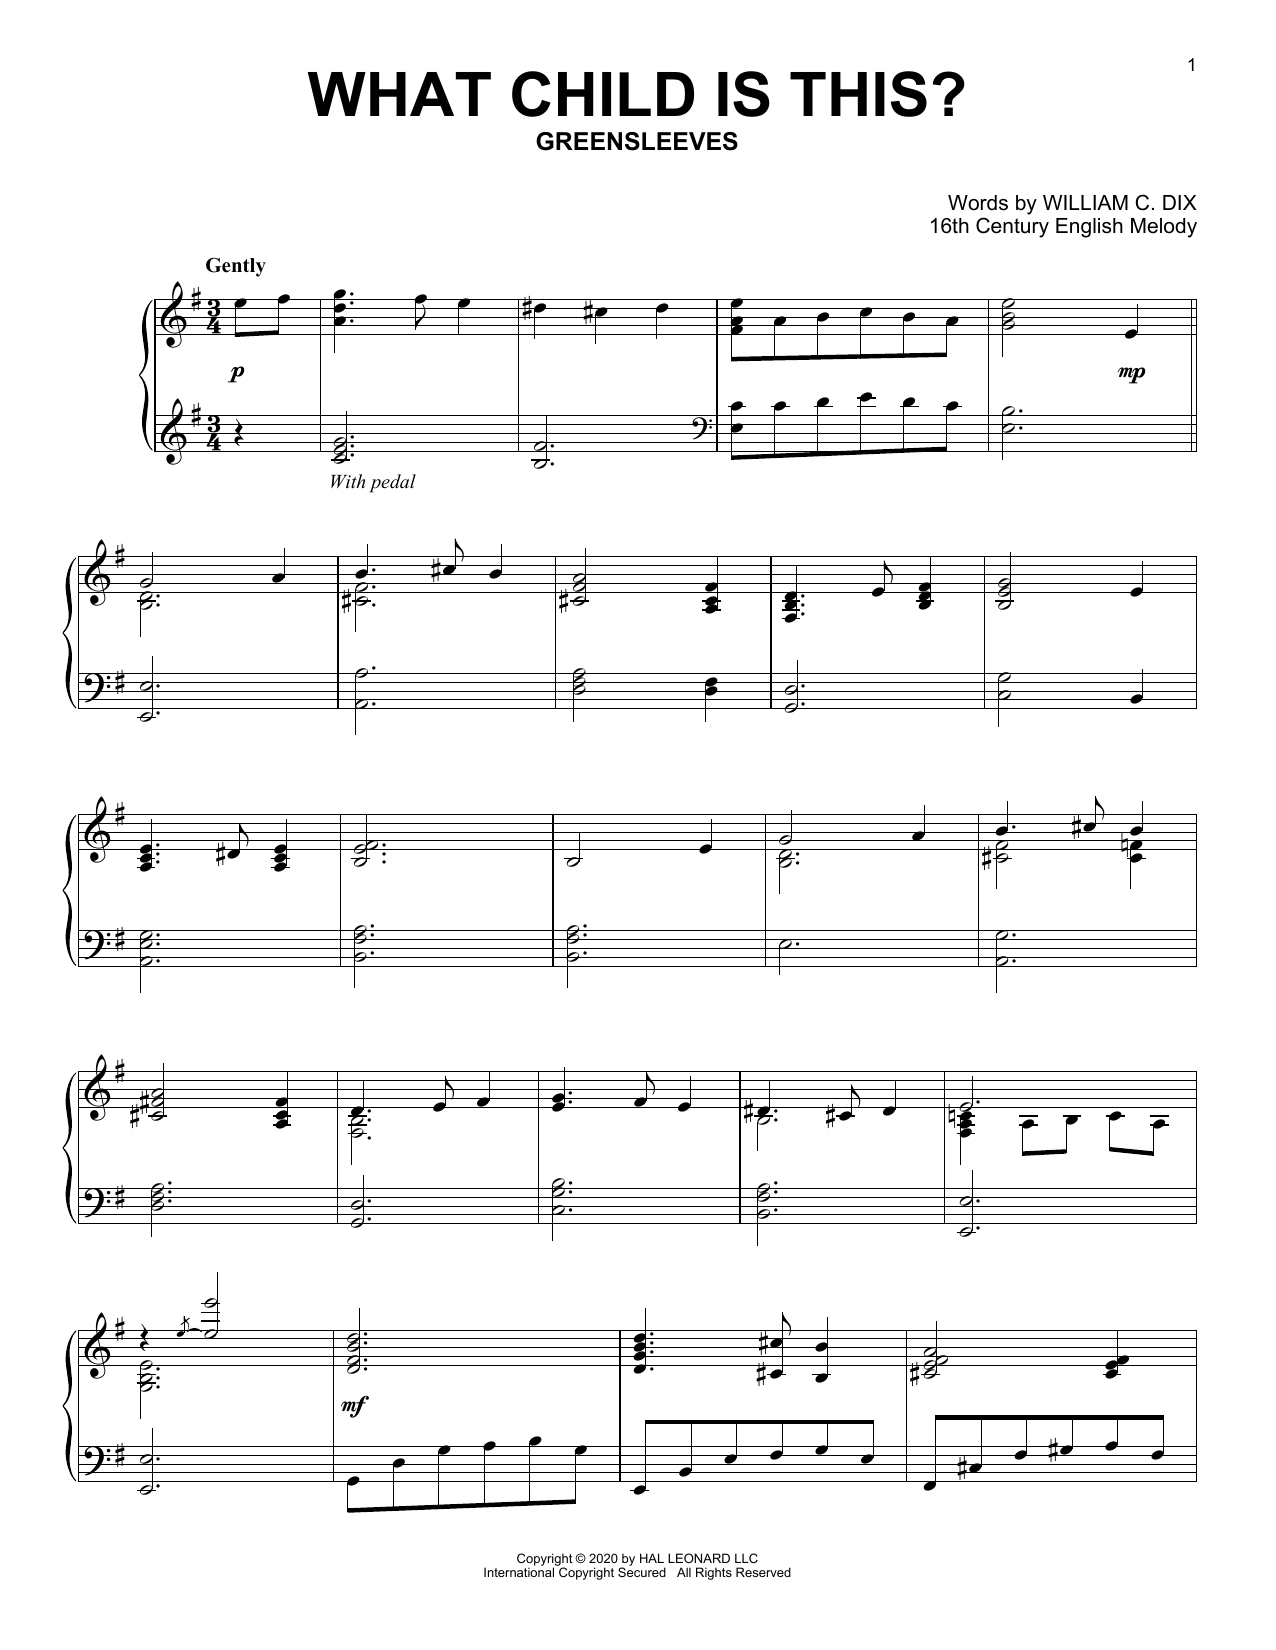 Download 16th Century English Melody What Child Is This? Sheet Music